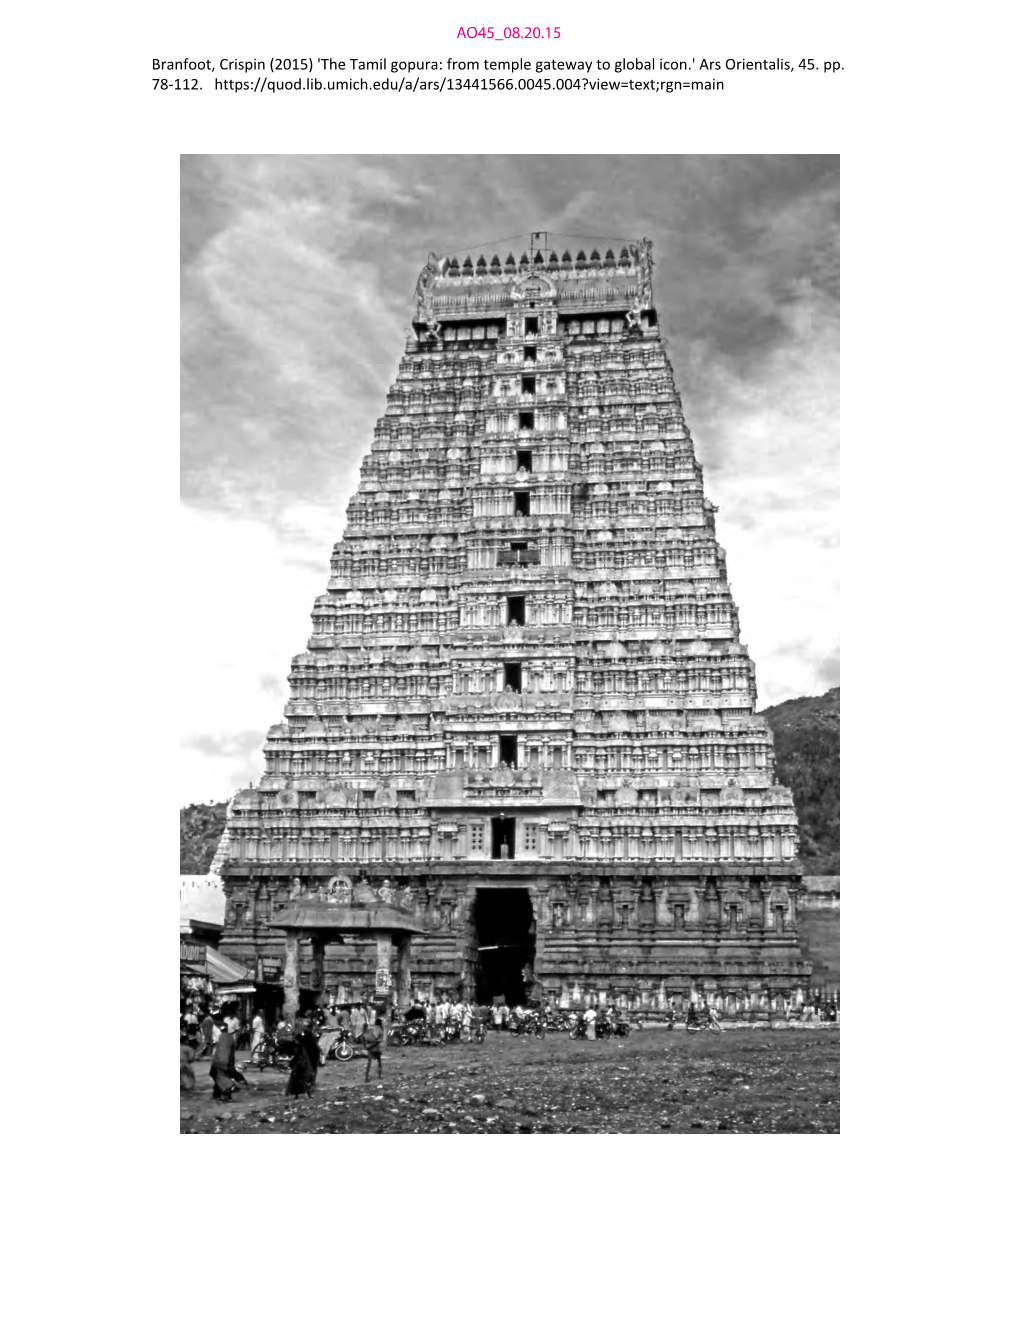 AO45 08.20.15 Branfoot, Crispin (2015) 'The Tamil Gopura: from Temple Gateway to Global Icon.' Ars Orientalis, 45